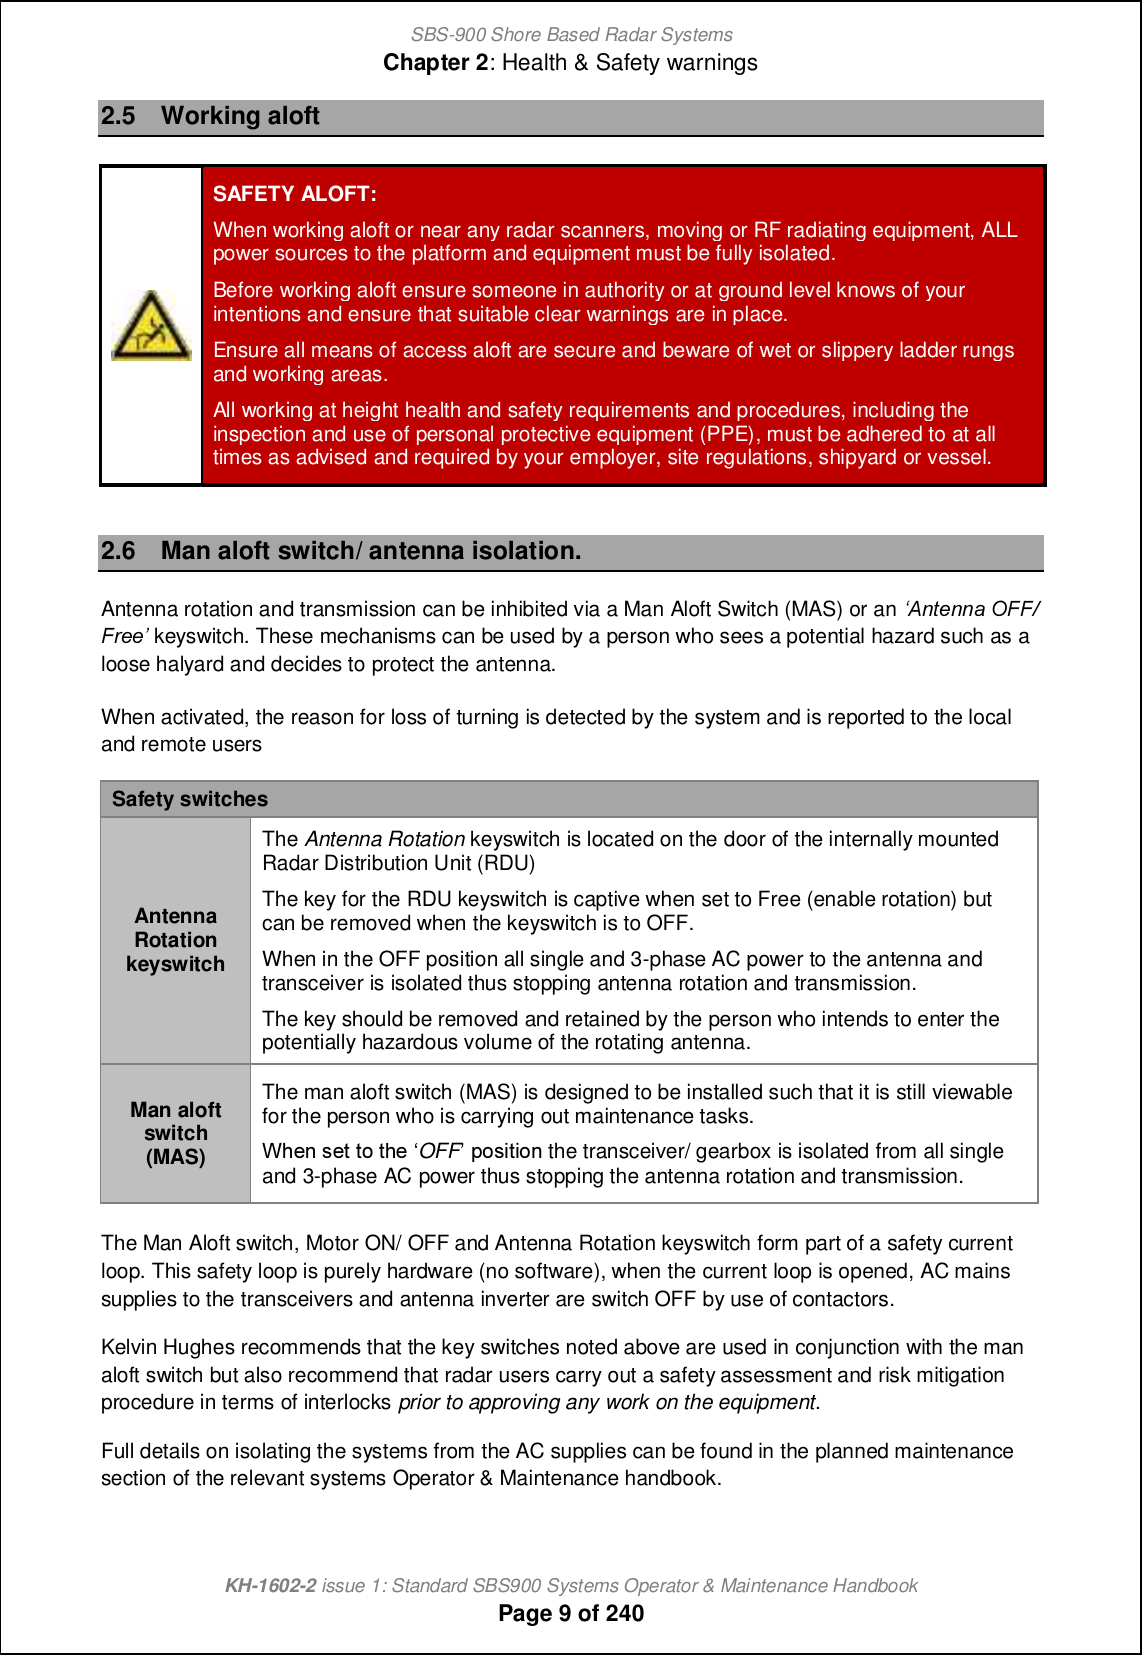 SBS-900 Shore Based Radar SystemsChapter 2: Health &amp; Safety warningsKH-1602-2 issue 1: Standard SBS900 Systems Operator &amp; Maintenance HandbookPage 9 of 2402.5 Working aloftSAFETY ALOFT:When working aloft or near any radar scanners, moving or RF radiating equipment, ALLpower sources to the platform and equipment must be fully isolated.Before working aloft ensure someone in authority or at ground level knows of yourintentions and ensure that suitable clear warnings are in place.Ensure all means of access aloft are secure and beware of wet or slippery ladder rungsand working areas.All working at height health and safety requirements and procedures, including theinspection and use of personal protective equipment (PPE), must be adhered to at alltimes as advised and required by your employer, site regulations, shipyard or vessel.2.6 Man aloft switch/ antenna isolation.Antenna rotation and transmission can be inhibited via a Man Aloft Switch (MAS) or an r&lt;agXaaT IAA-AeXXs keyswitch. These mechanisms can be used by a person who sees a potential hazard such as aloose halyard and decides to protect the antenna.When activated, the reason for loss of turning is detected by the system and is reported to the localand remote usersSafety switchesAntennaRotationkeyswitchThe Antenna Rotation keyswitch is located on the door of the internally mountedRadar Distribution Unit (RDU)The key for the RDU keyswitch is captive when set to Free (enable rotation) butcan be removed when the keyswitch is to OFF.When in the OFF position all single and 3-phase AC power to the antenna andtransceiver is isolated thus stopping antenna rotation and transmission.The key should be removed and retained by the person who intends to enter thepotentially hazardous volume of the rotating antenna.Man aloftswitch(MAS)The man aloft switch (MAS) is designed to be installed such that it is still viewablefor the person who is carrying out maintenance tasks.Vb_h m_n ni nb_ •OFF jimcncih the transceiver/ gearbox is isolated from all singleand 3-phase AC power thus stopping the antenna rotation and transmission.The Man Aloft switch, Motor ON/ OFF and Antenna Rotation keyswitch form part of a safety currentloop. This safety loop is purely hardware (no software), when the current loop is opened, AC mainssupplies to the transceivers and antenna inverter are switch OFF by use of contactors.Kelvin Hughes recommends that the key switches noted above are used in conjunction with the manaloft switch but also recommend that radar users carry out a safety assessment and risk mitigationprocedure in terms of interlocks prior to approving any work on the equipment.Full details on isolating the systems from the AC supplies can be found in the planned maintenancesection of the relevant systems Operator &amp; Maintenance handbook.